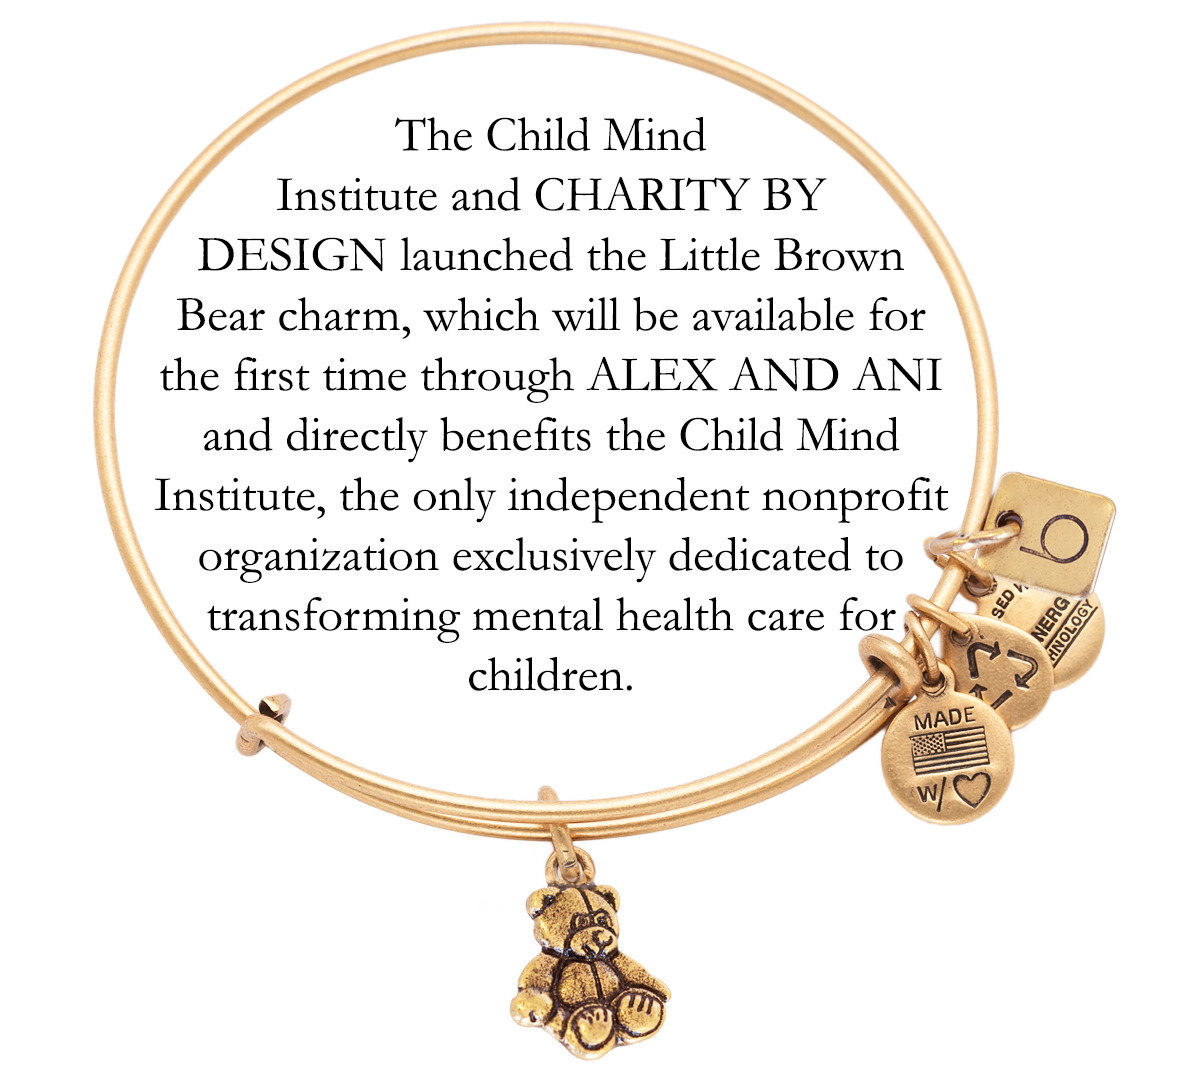 ALEX AND ANI Launches Little Brown Bear Charm to Benefit the Child Mind Institute